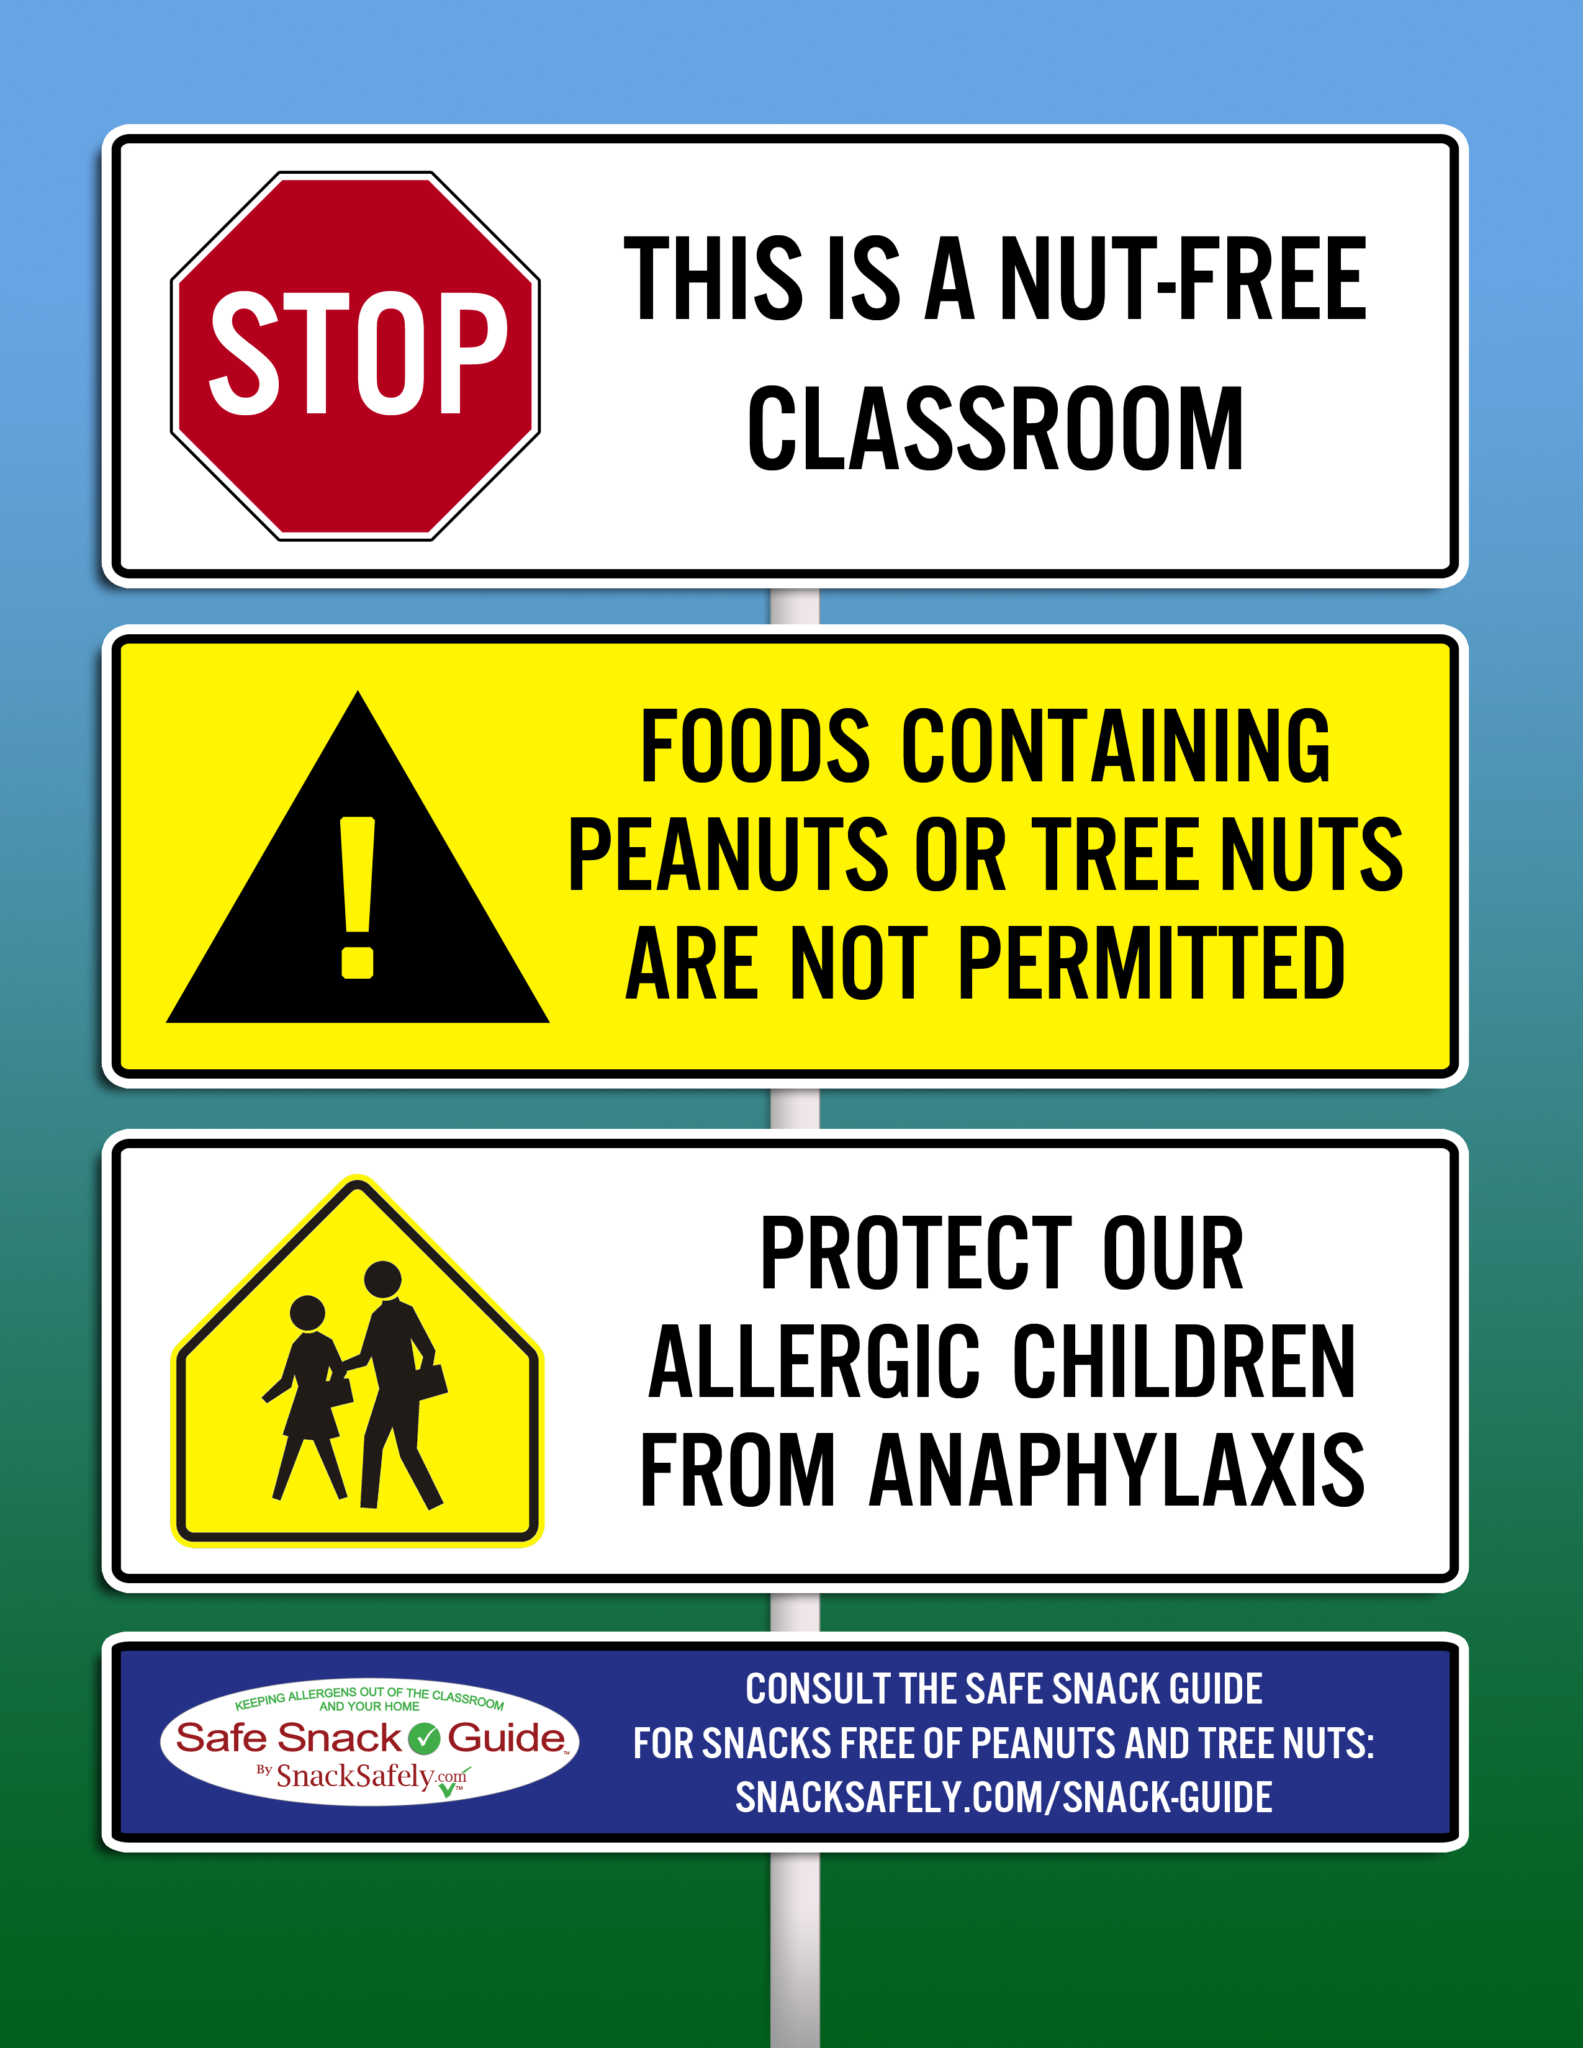 nut-free-notice-graphics-for-your-school-snacksafely